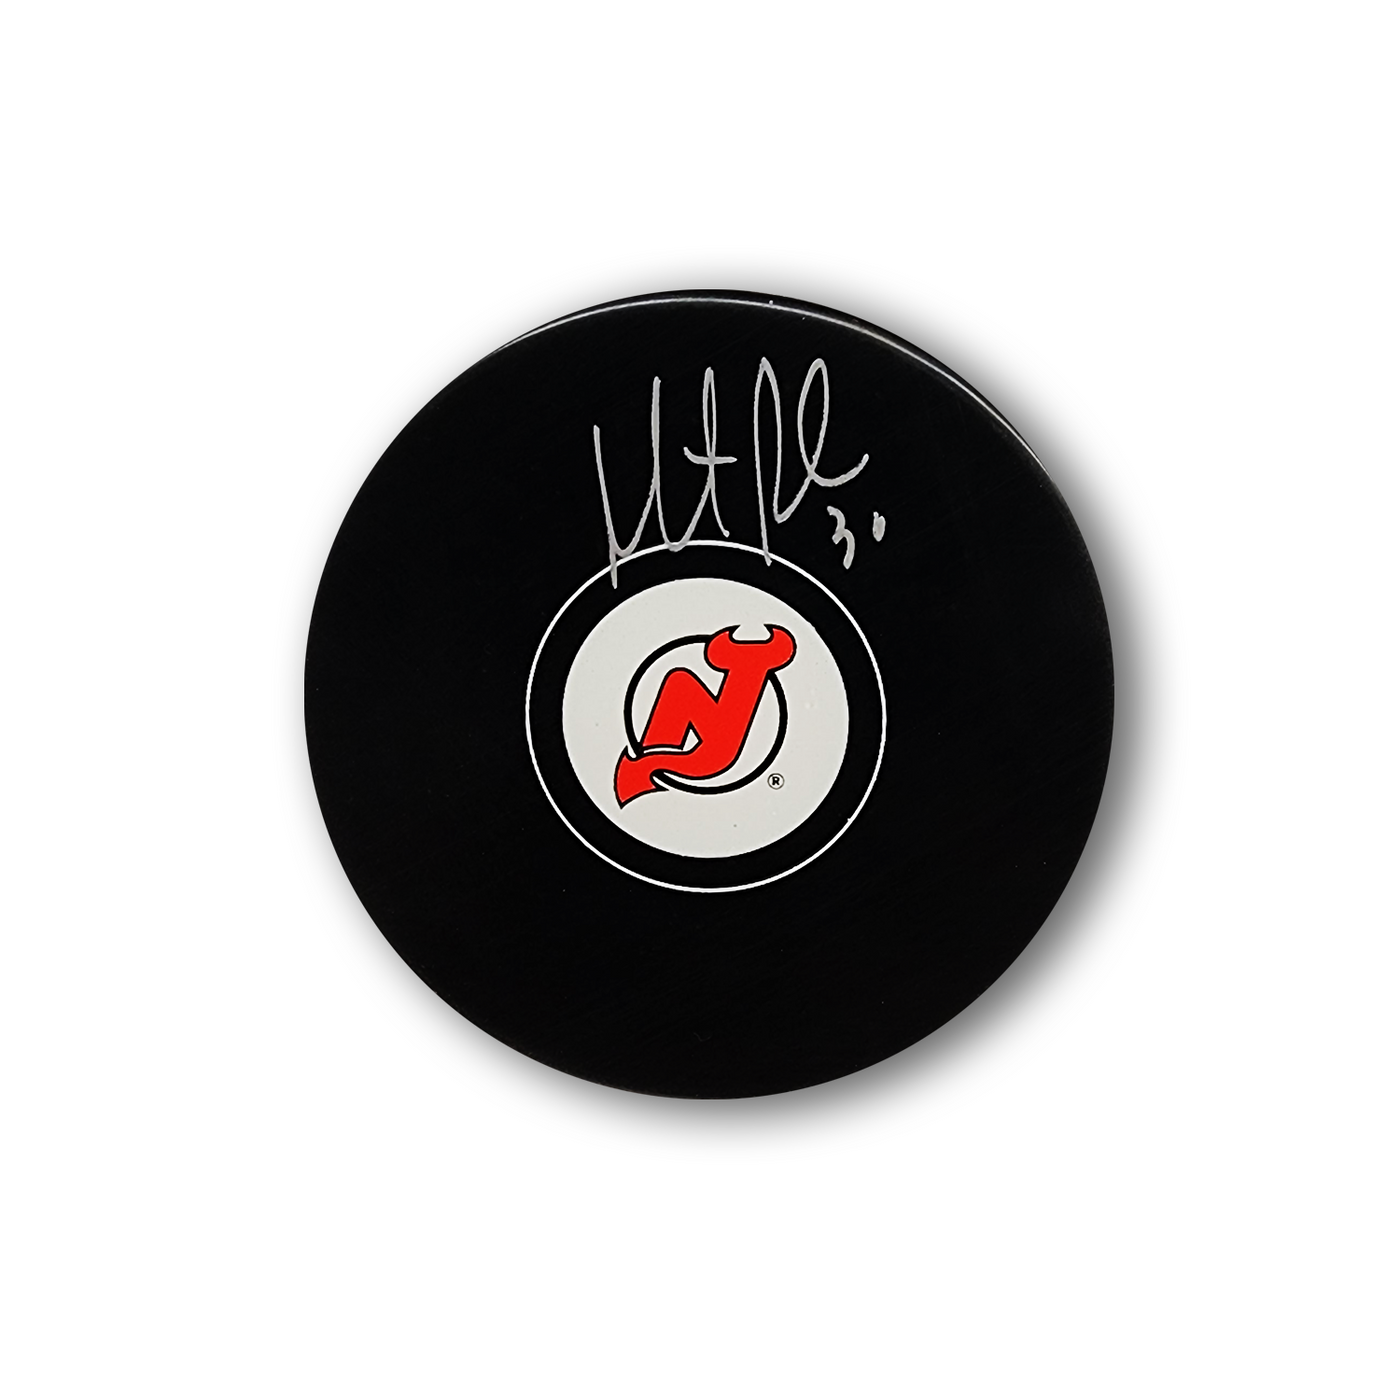 Martin Brodeur Autographed New Jersey Devils Hockey Puck